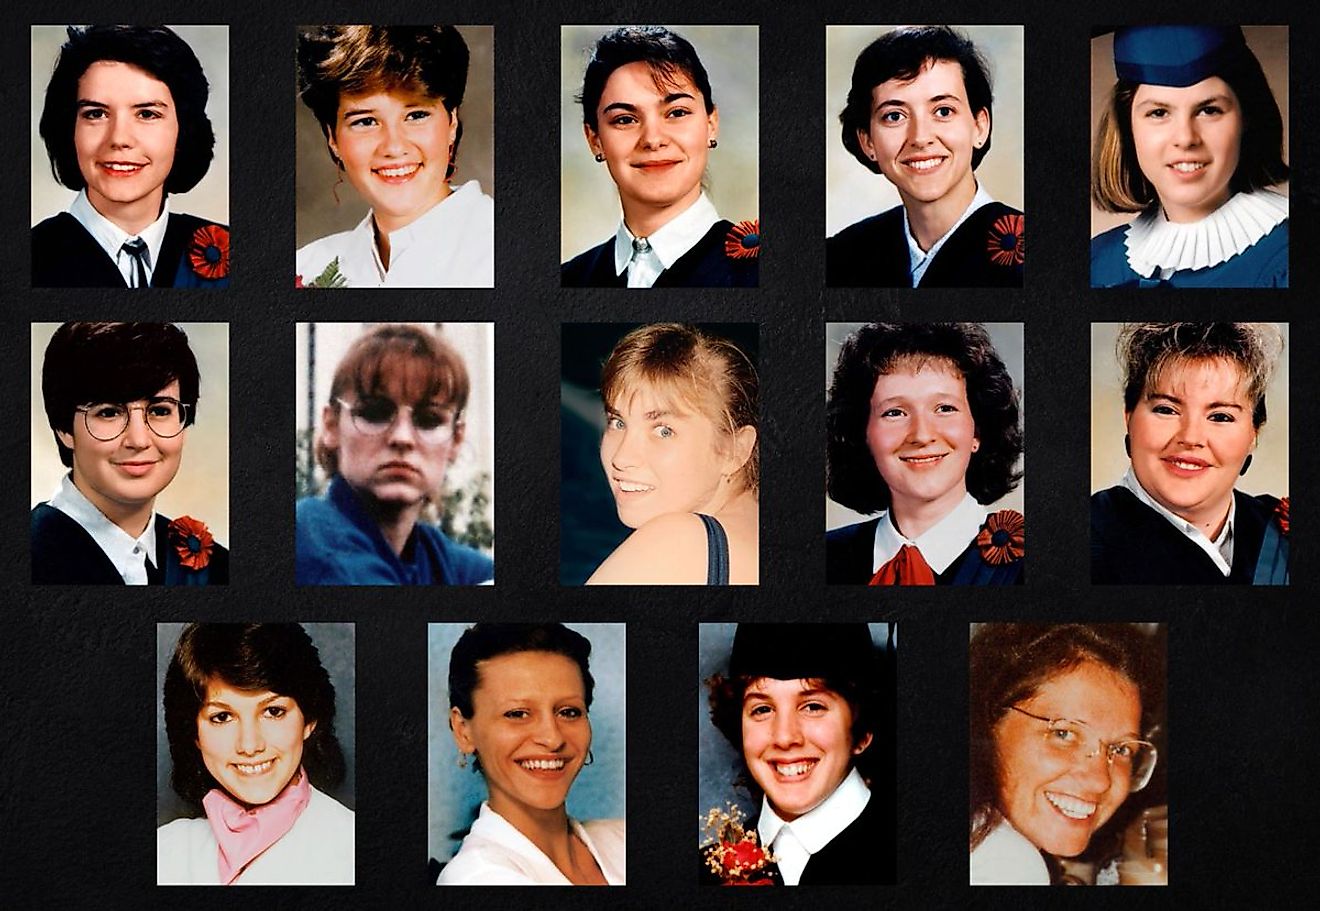 The 14 victims of the ecoly polytechnique massacre.